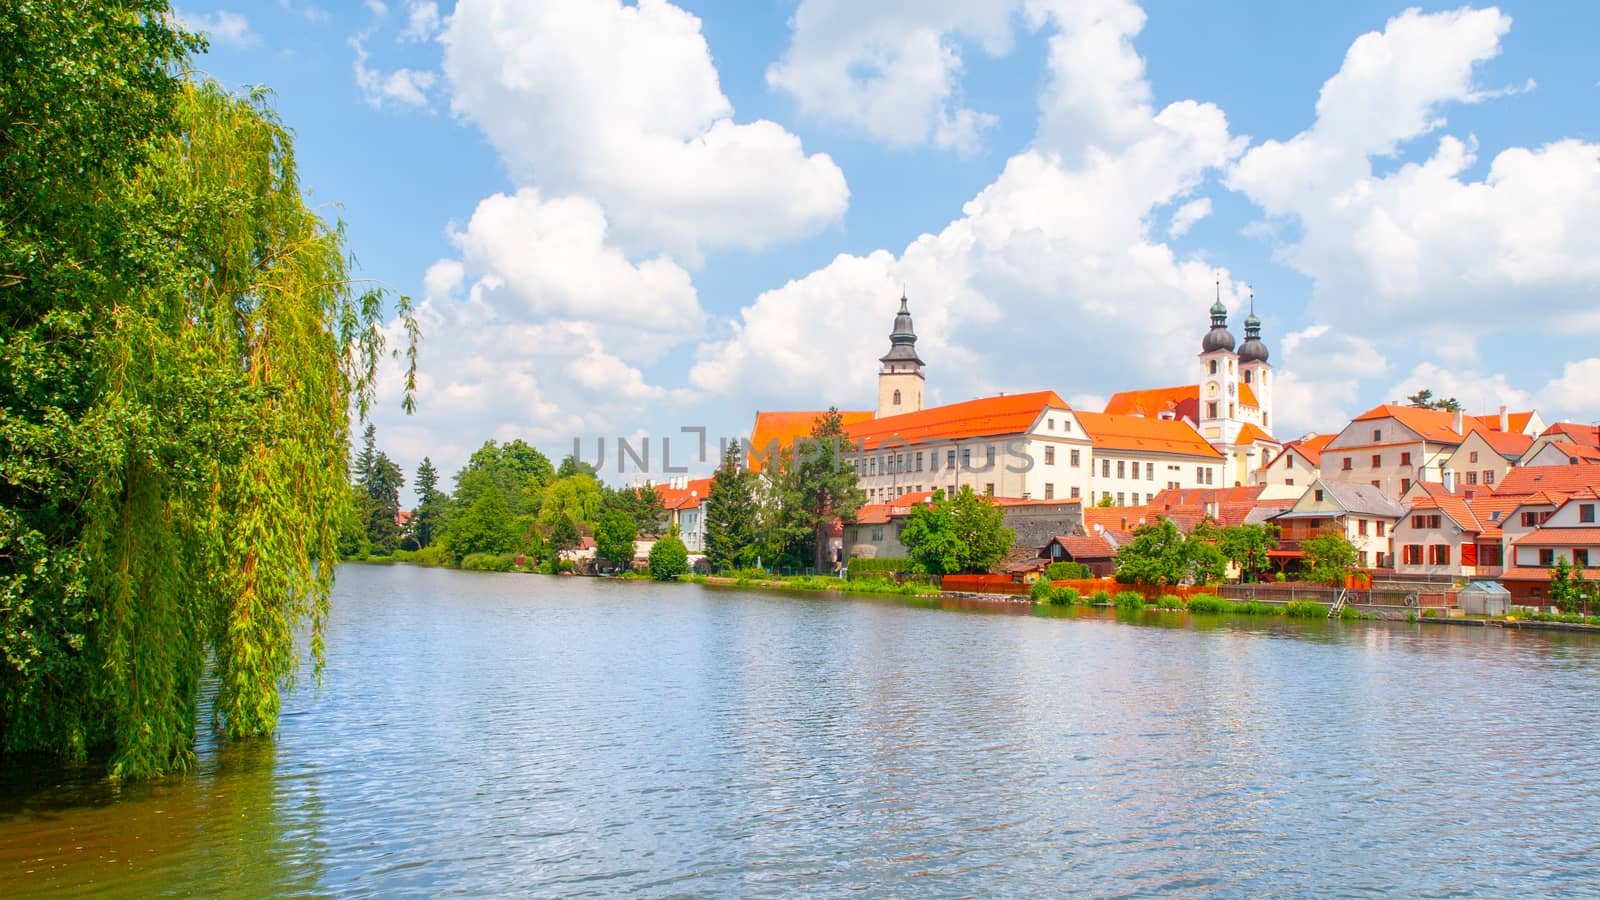 Telc Panorama. Water reflection of houses and Telc Castle, Czech Republic. UNESCO World Heritage Site.